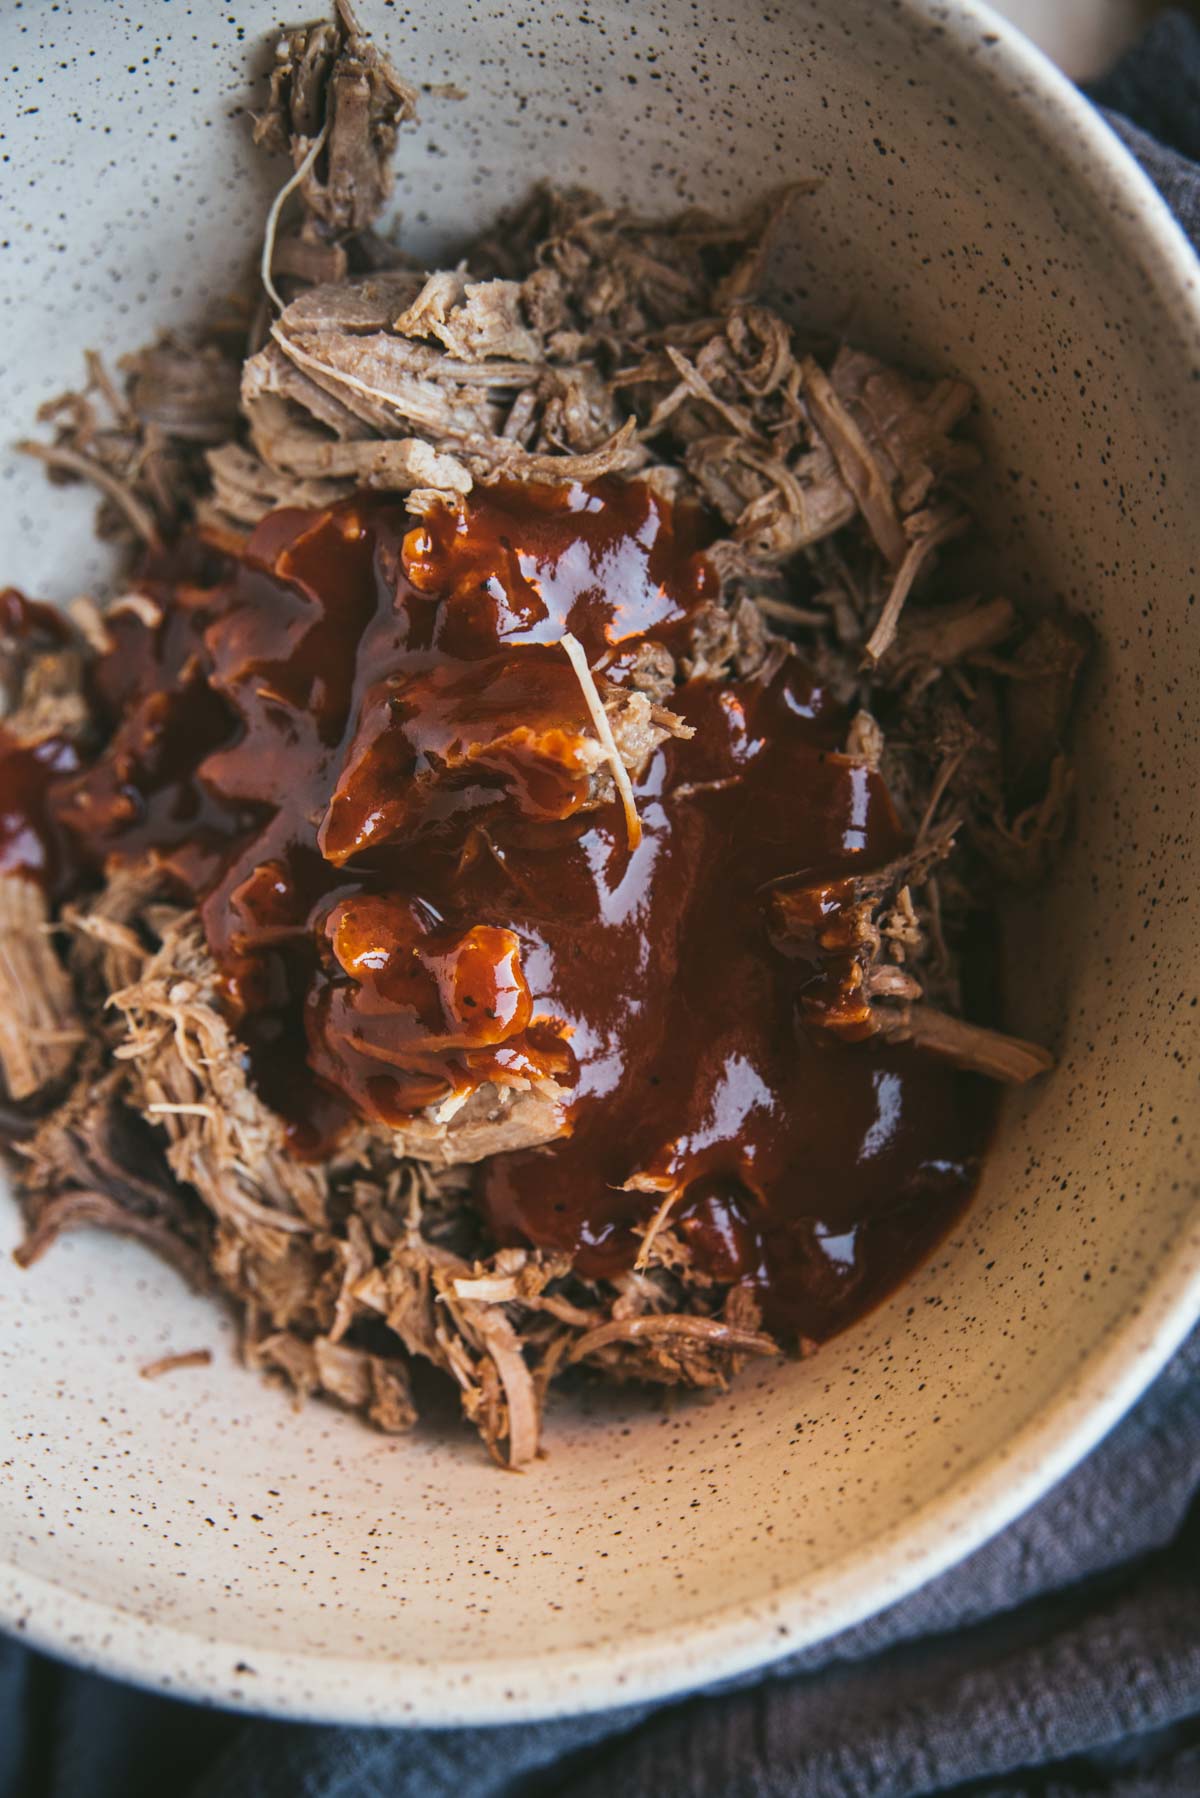 The pork has been placed into a deep terrazzo bowl and has been shredded, it has been topped with plenty of bbq sauce but it has not yet been mixed together.